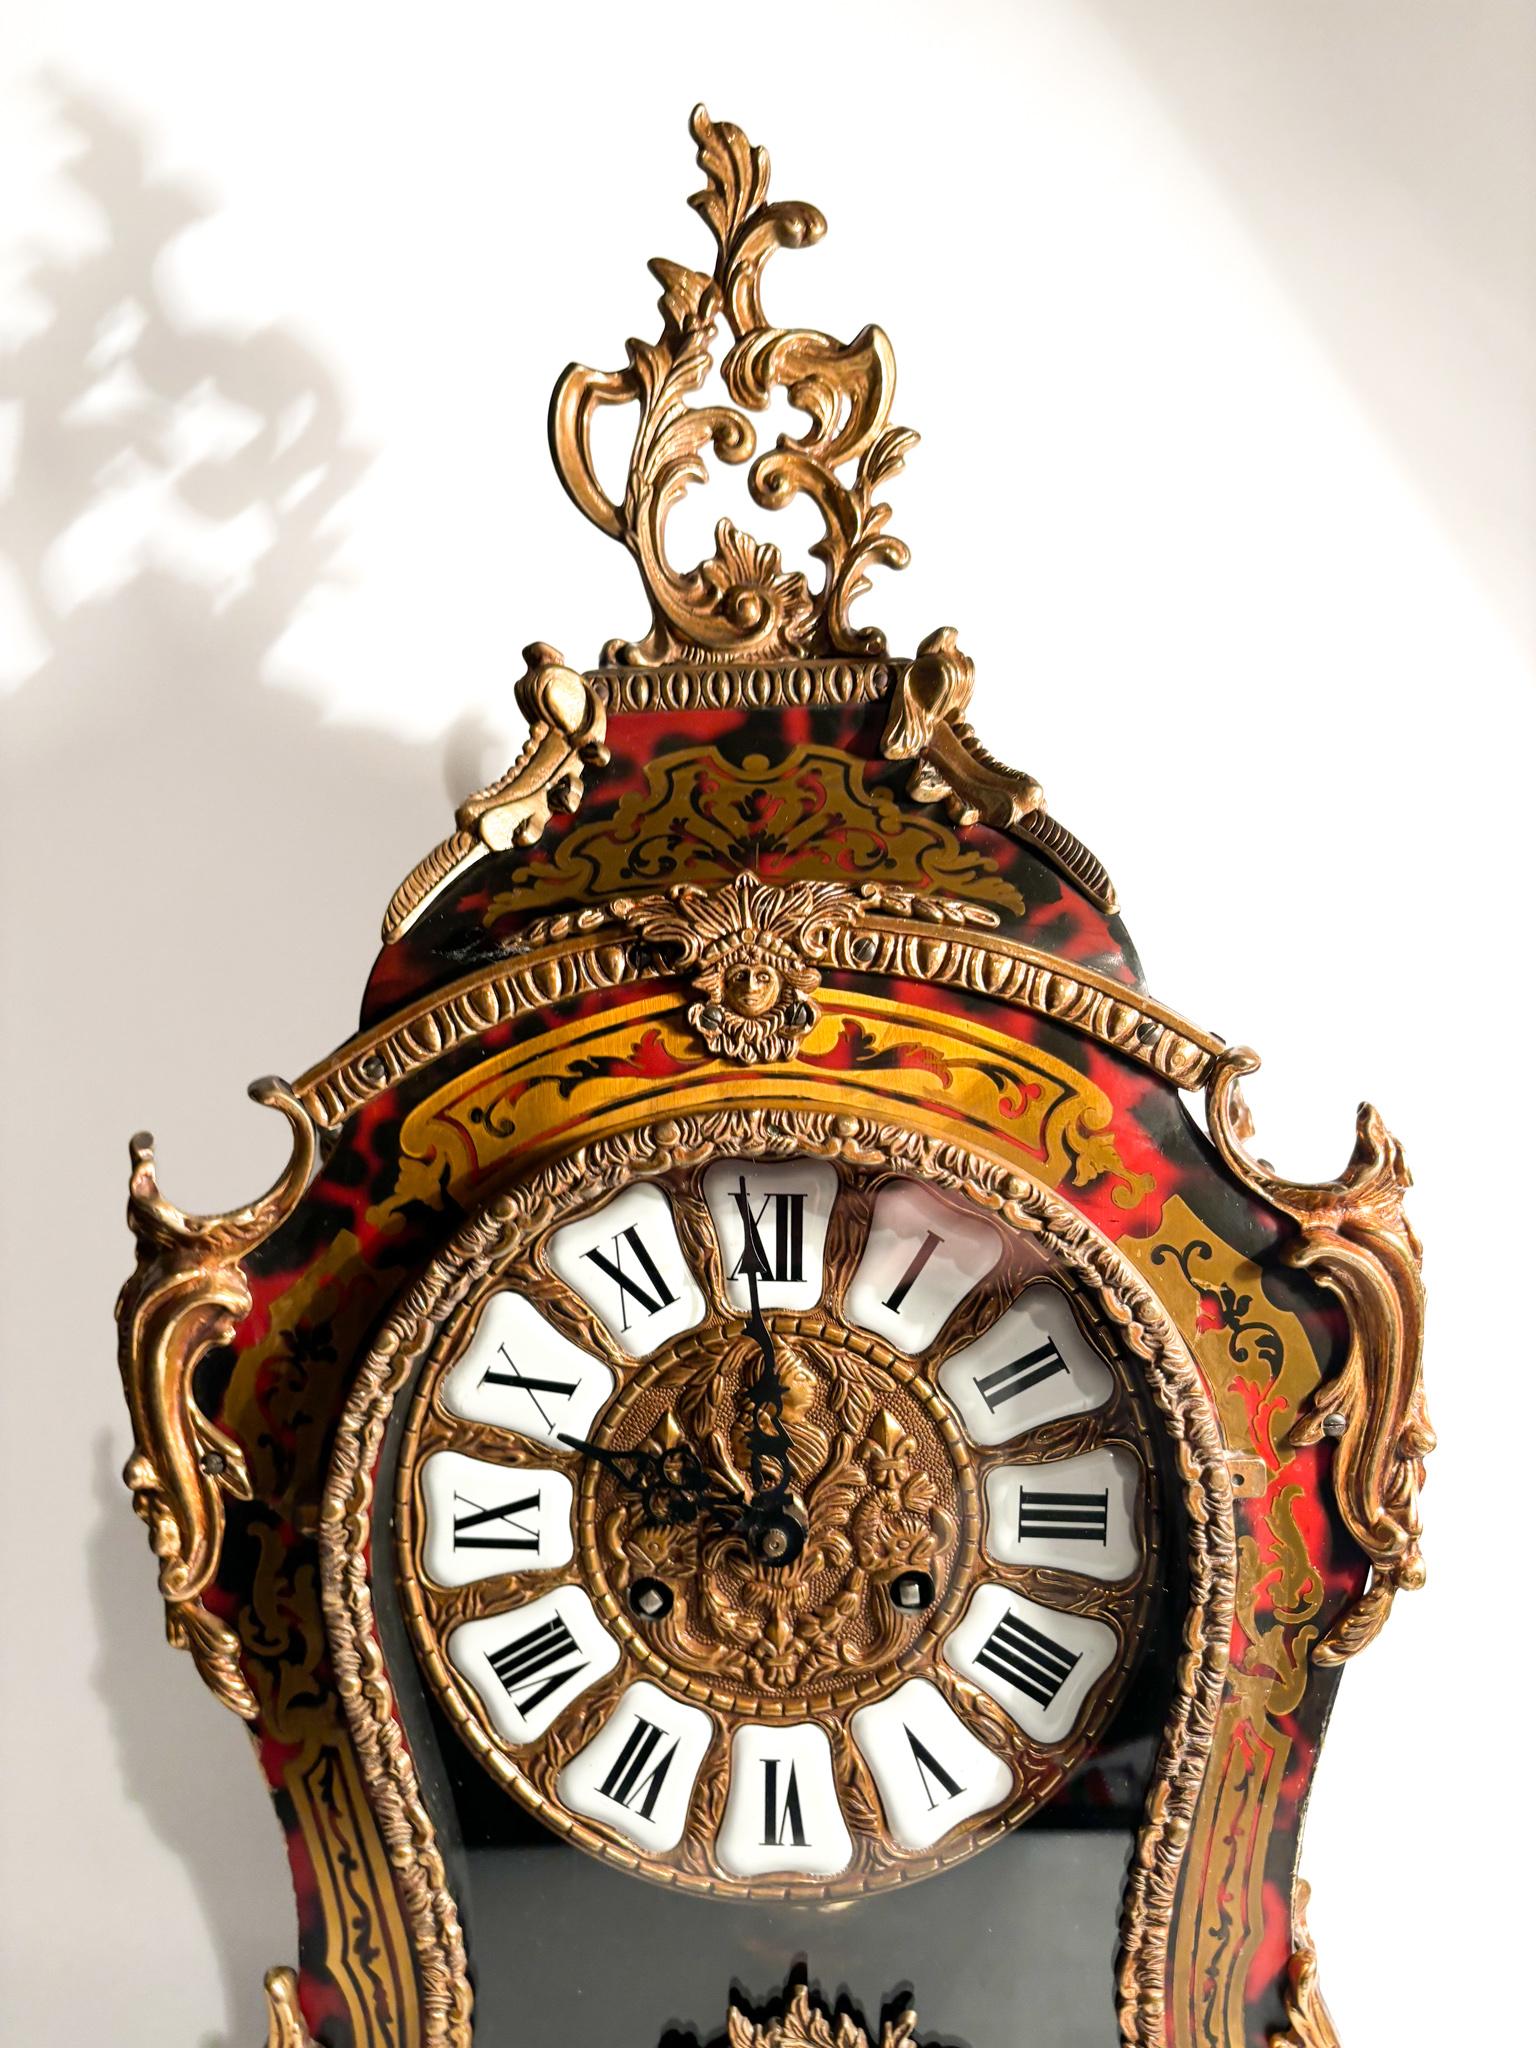 Boulle Table Clock, with red background and brass inlays, brass dial with white enamel cartouches and black Roman numerals, crowned with rocailles and pendulum movement. 

Ø 31.5 cm Ø 15 cm h 58 cm

A Boulle clock is a type of decorative clock